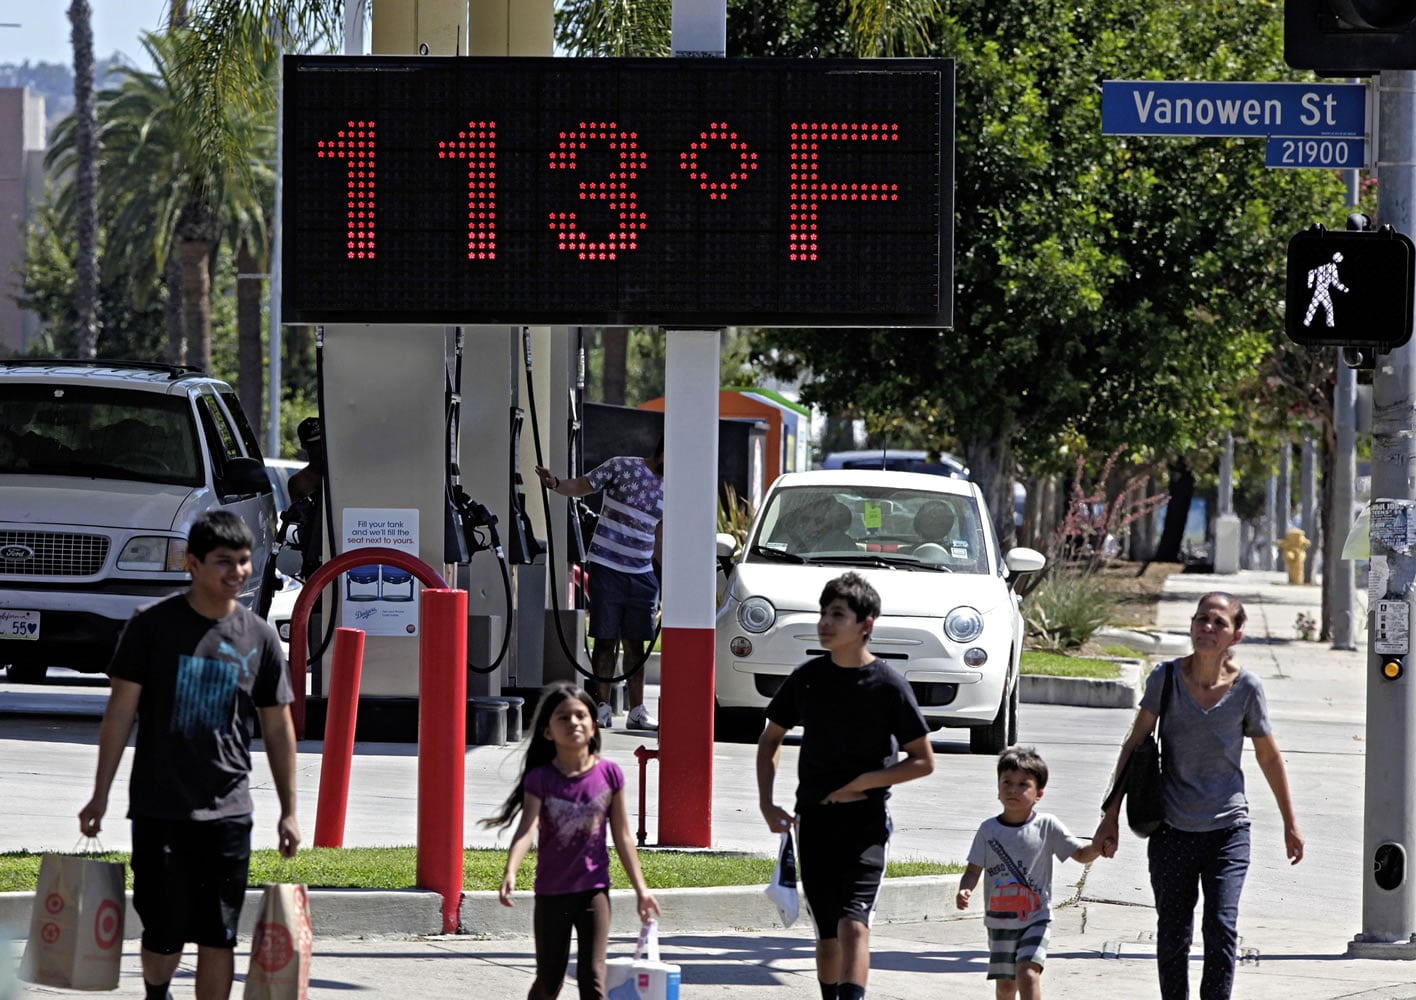 Pedestrians walk past a digital thermometer reading 113 degrees Fahrenheit in the Canoga Park section of Los Angeles.